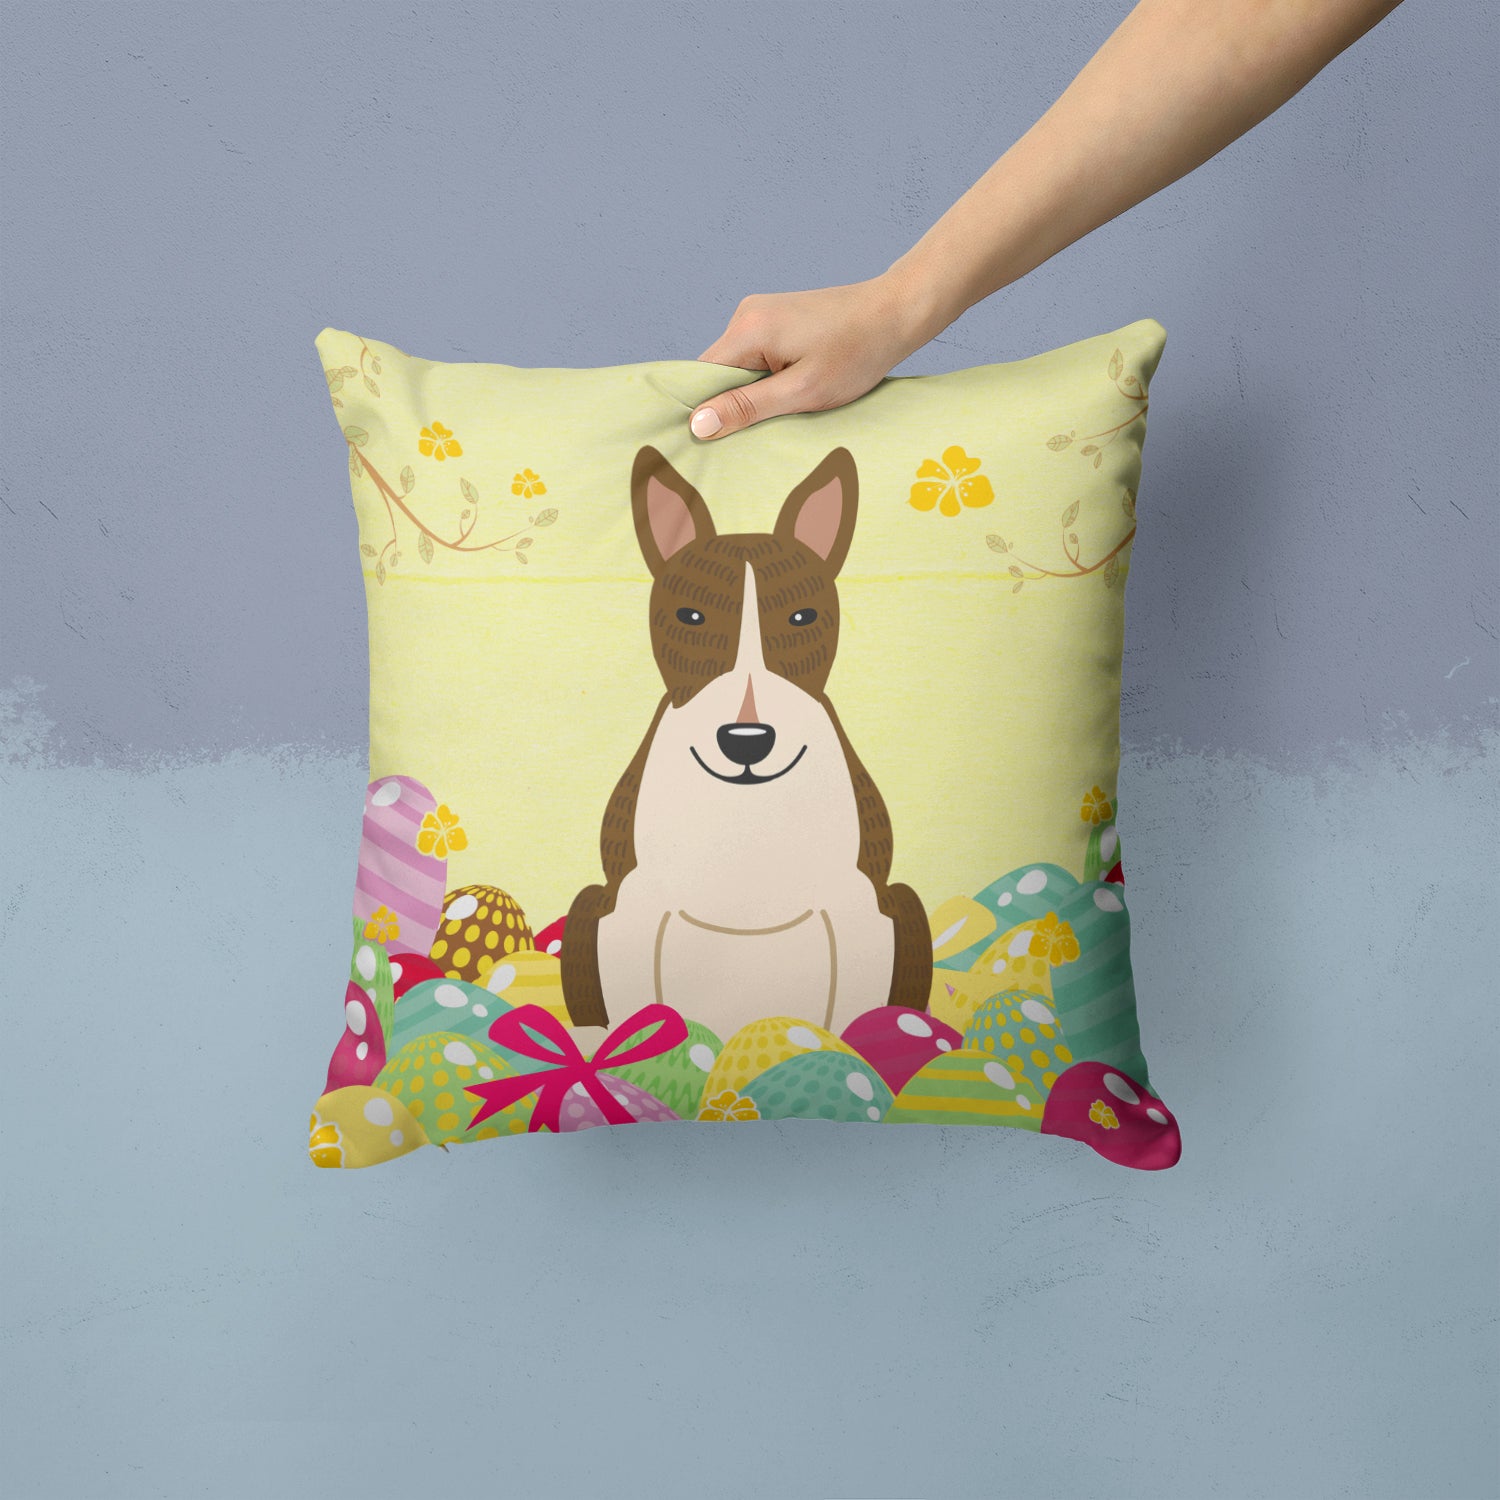 Easter Eggs Bull Terrier Dark Brindle Fabric Decorative Pillow BB6136PW1414 - the-store.com